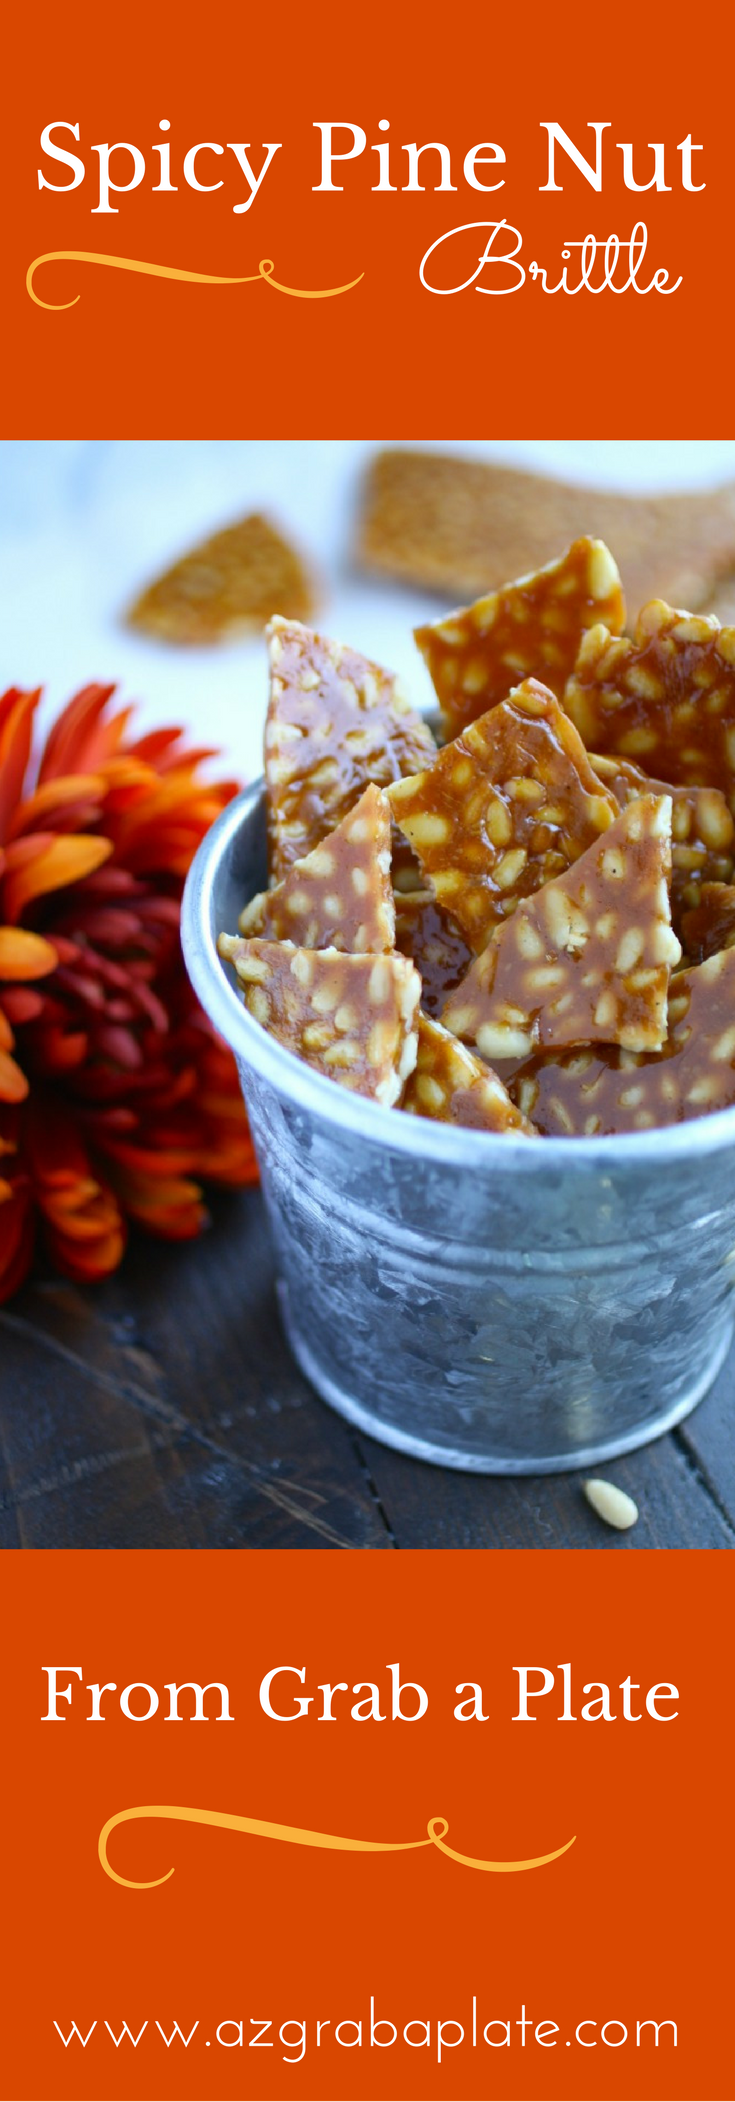 Spicy Pine Nut Brittle is a cut above standard brittle -- it's so delicious!